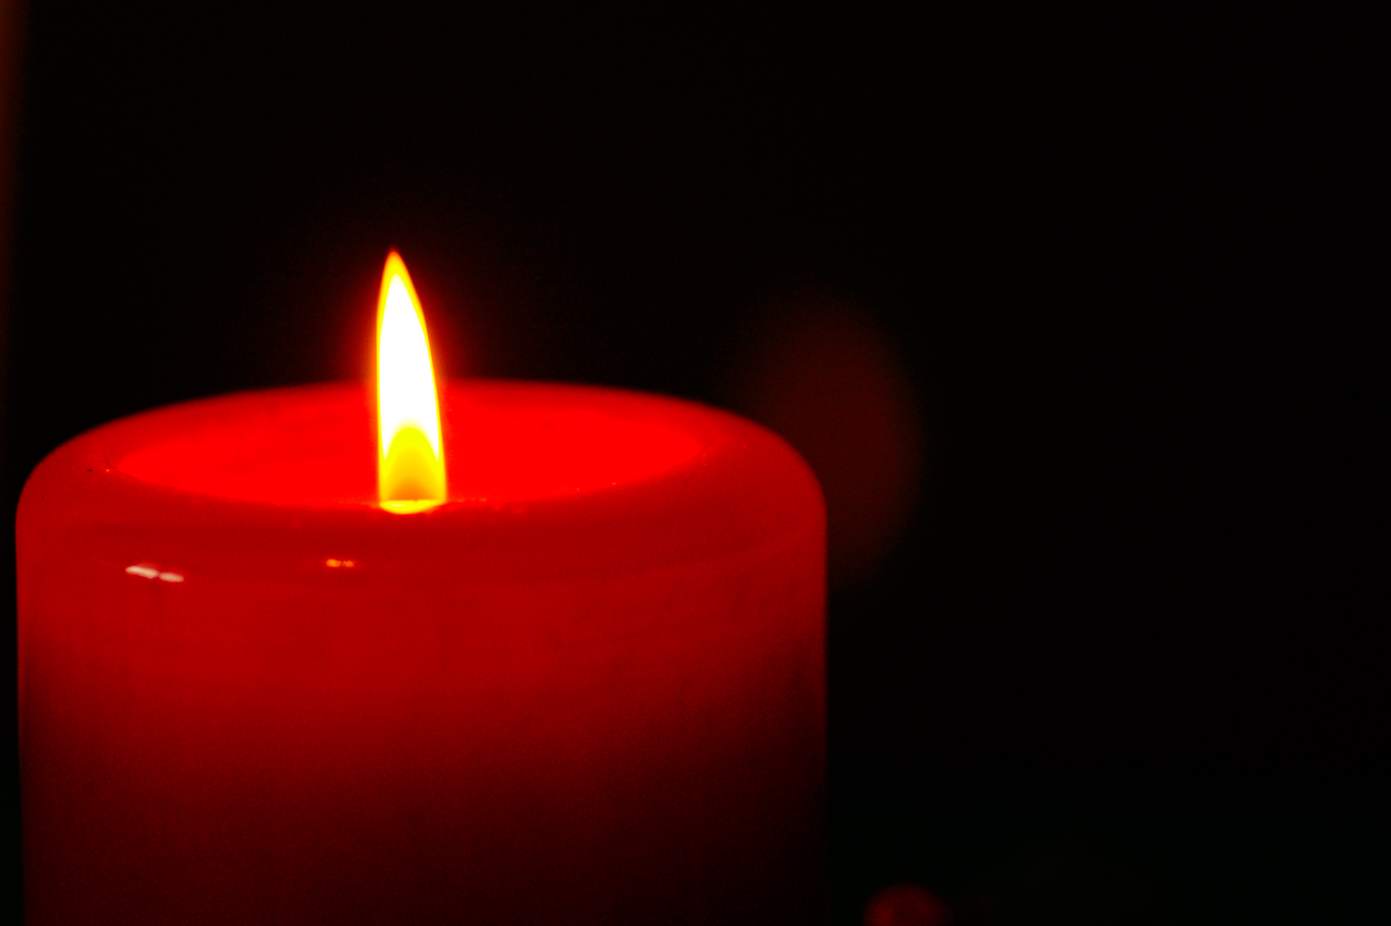 I light a candle and sob quietly in the near darkness for Dr. Ford and others.